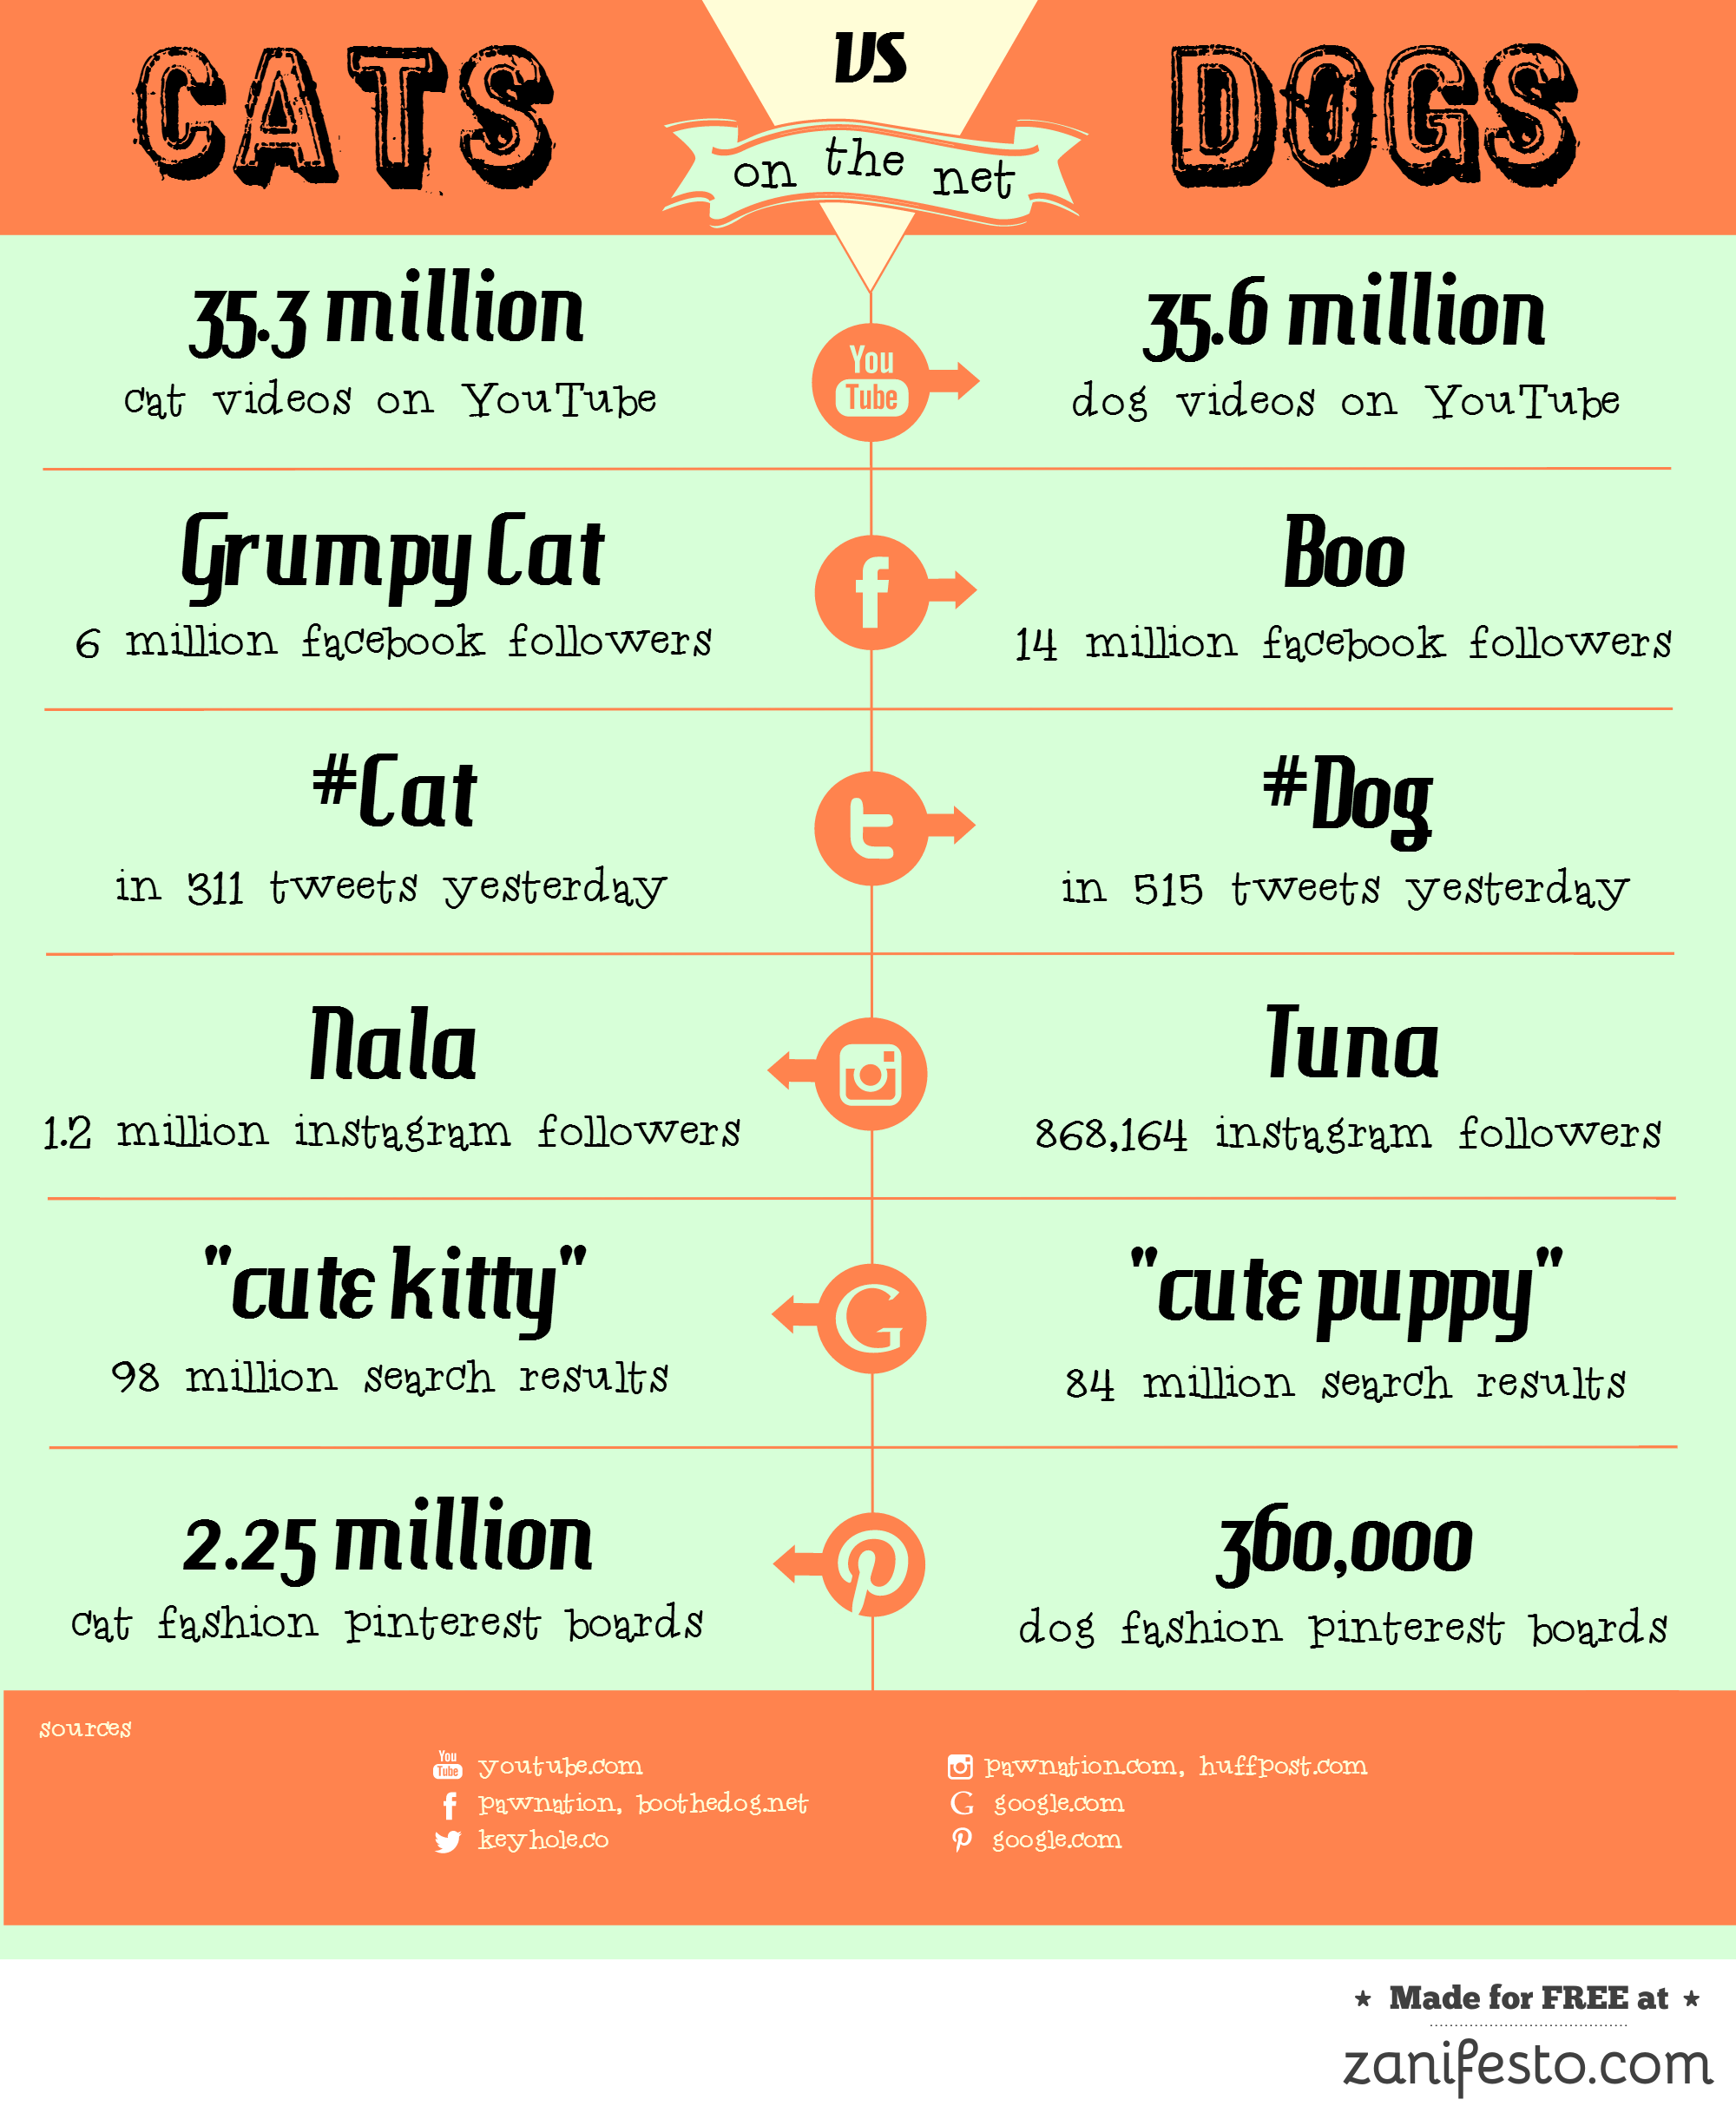 are dogs or cats more popular on the internet